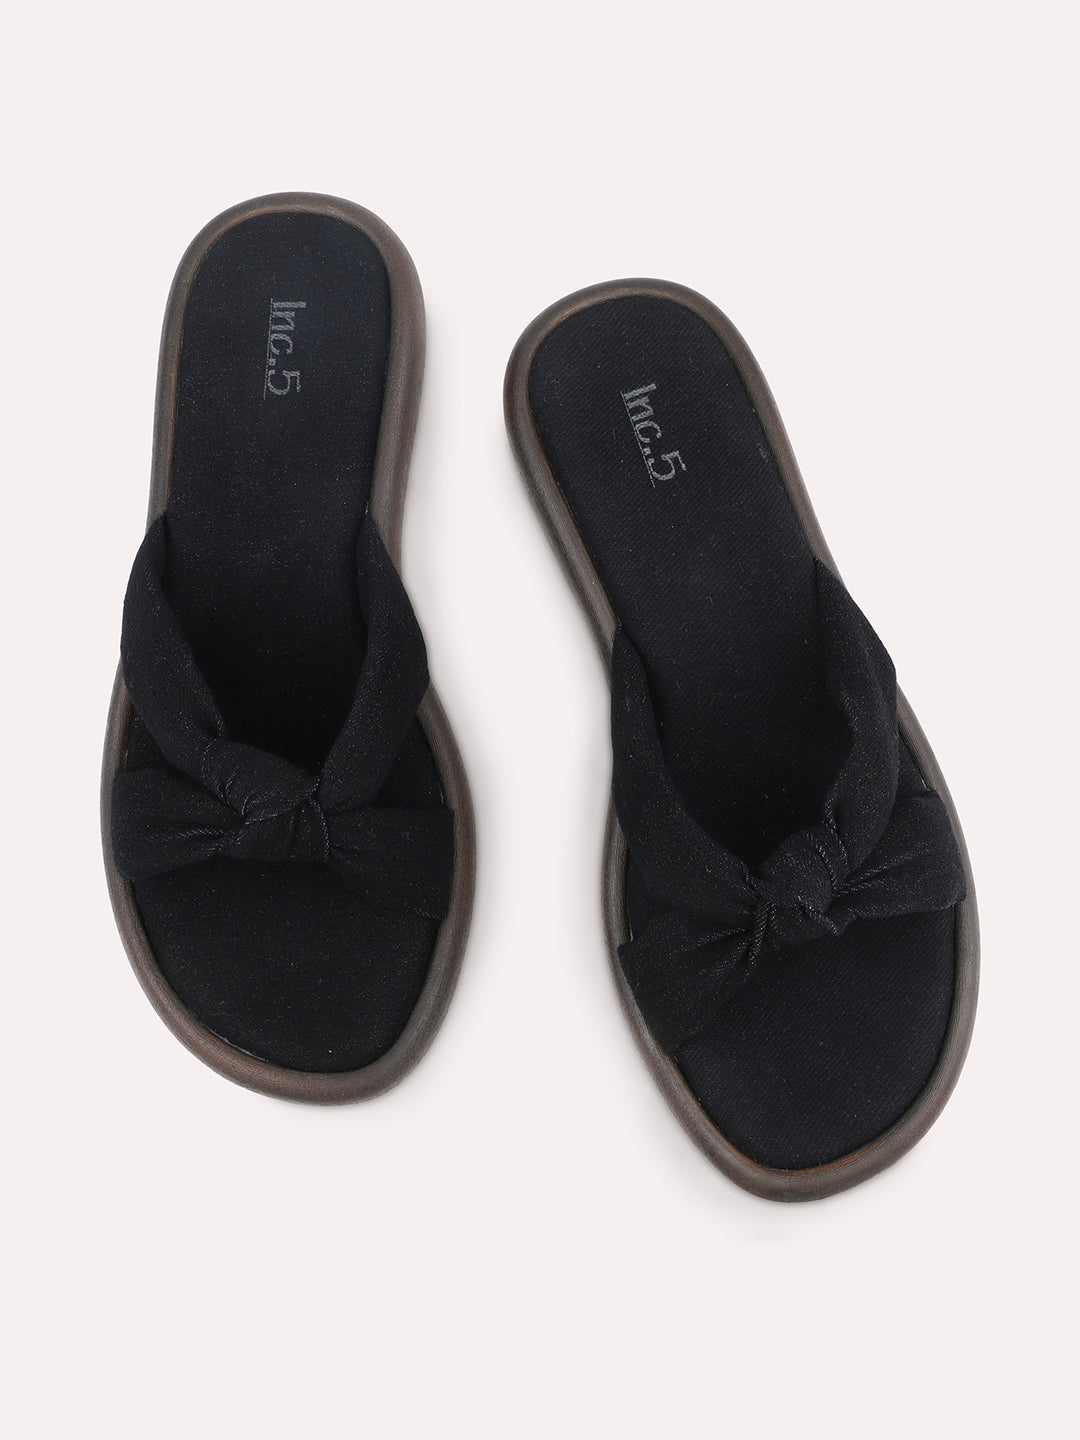 Women Black Open Toe Flats with Knot Detail